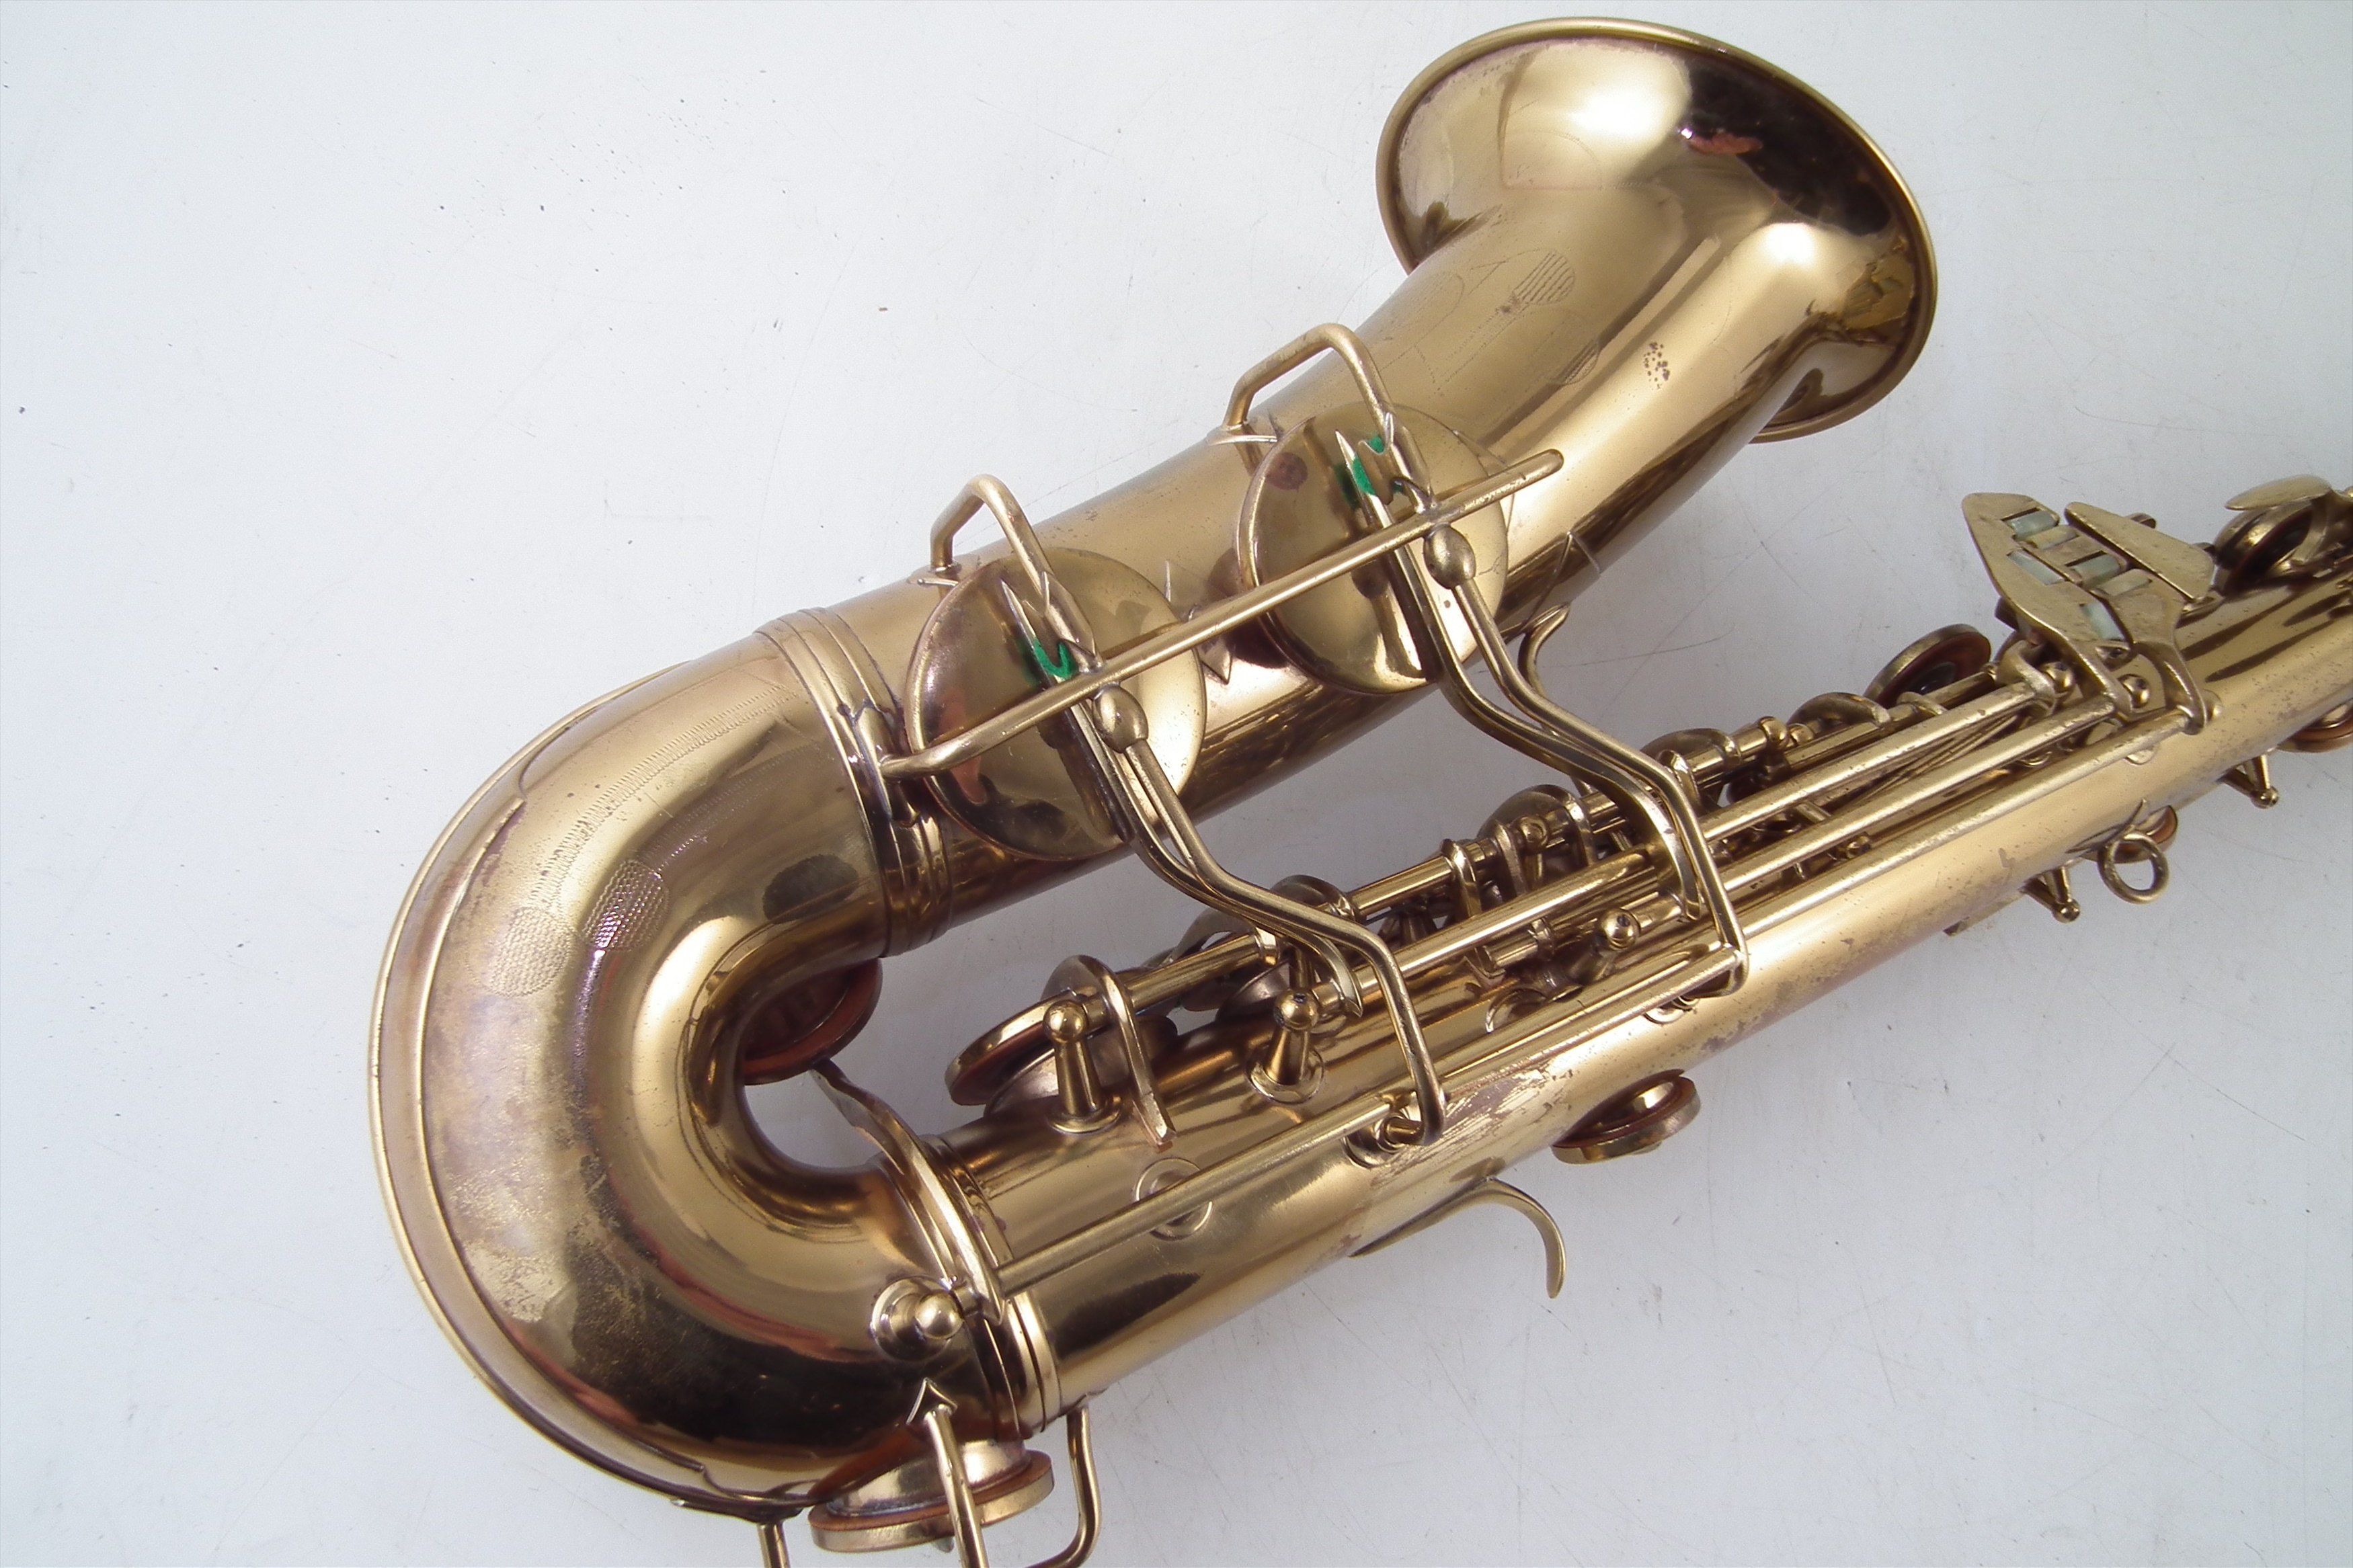 Conn Naked Lady saxophone in case - Image 10 of 15